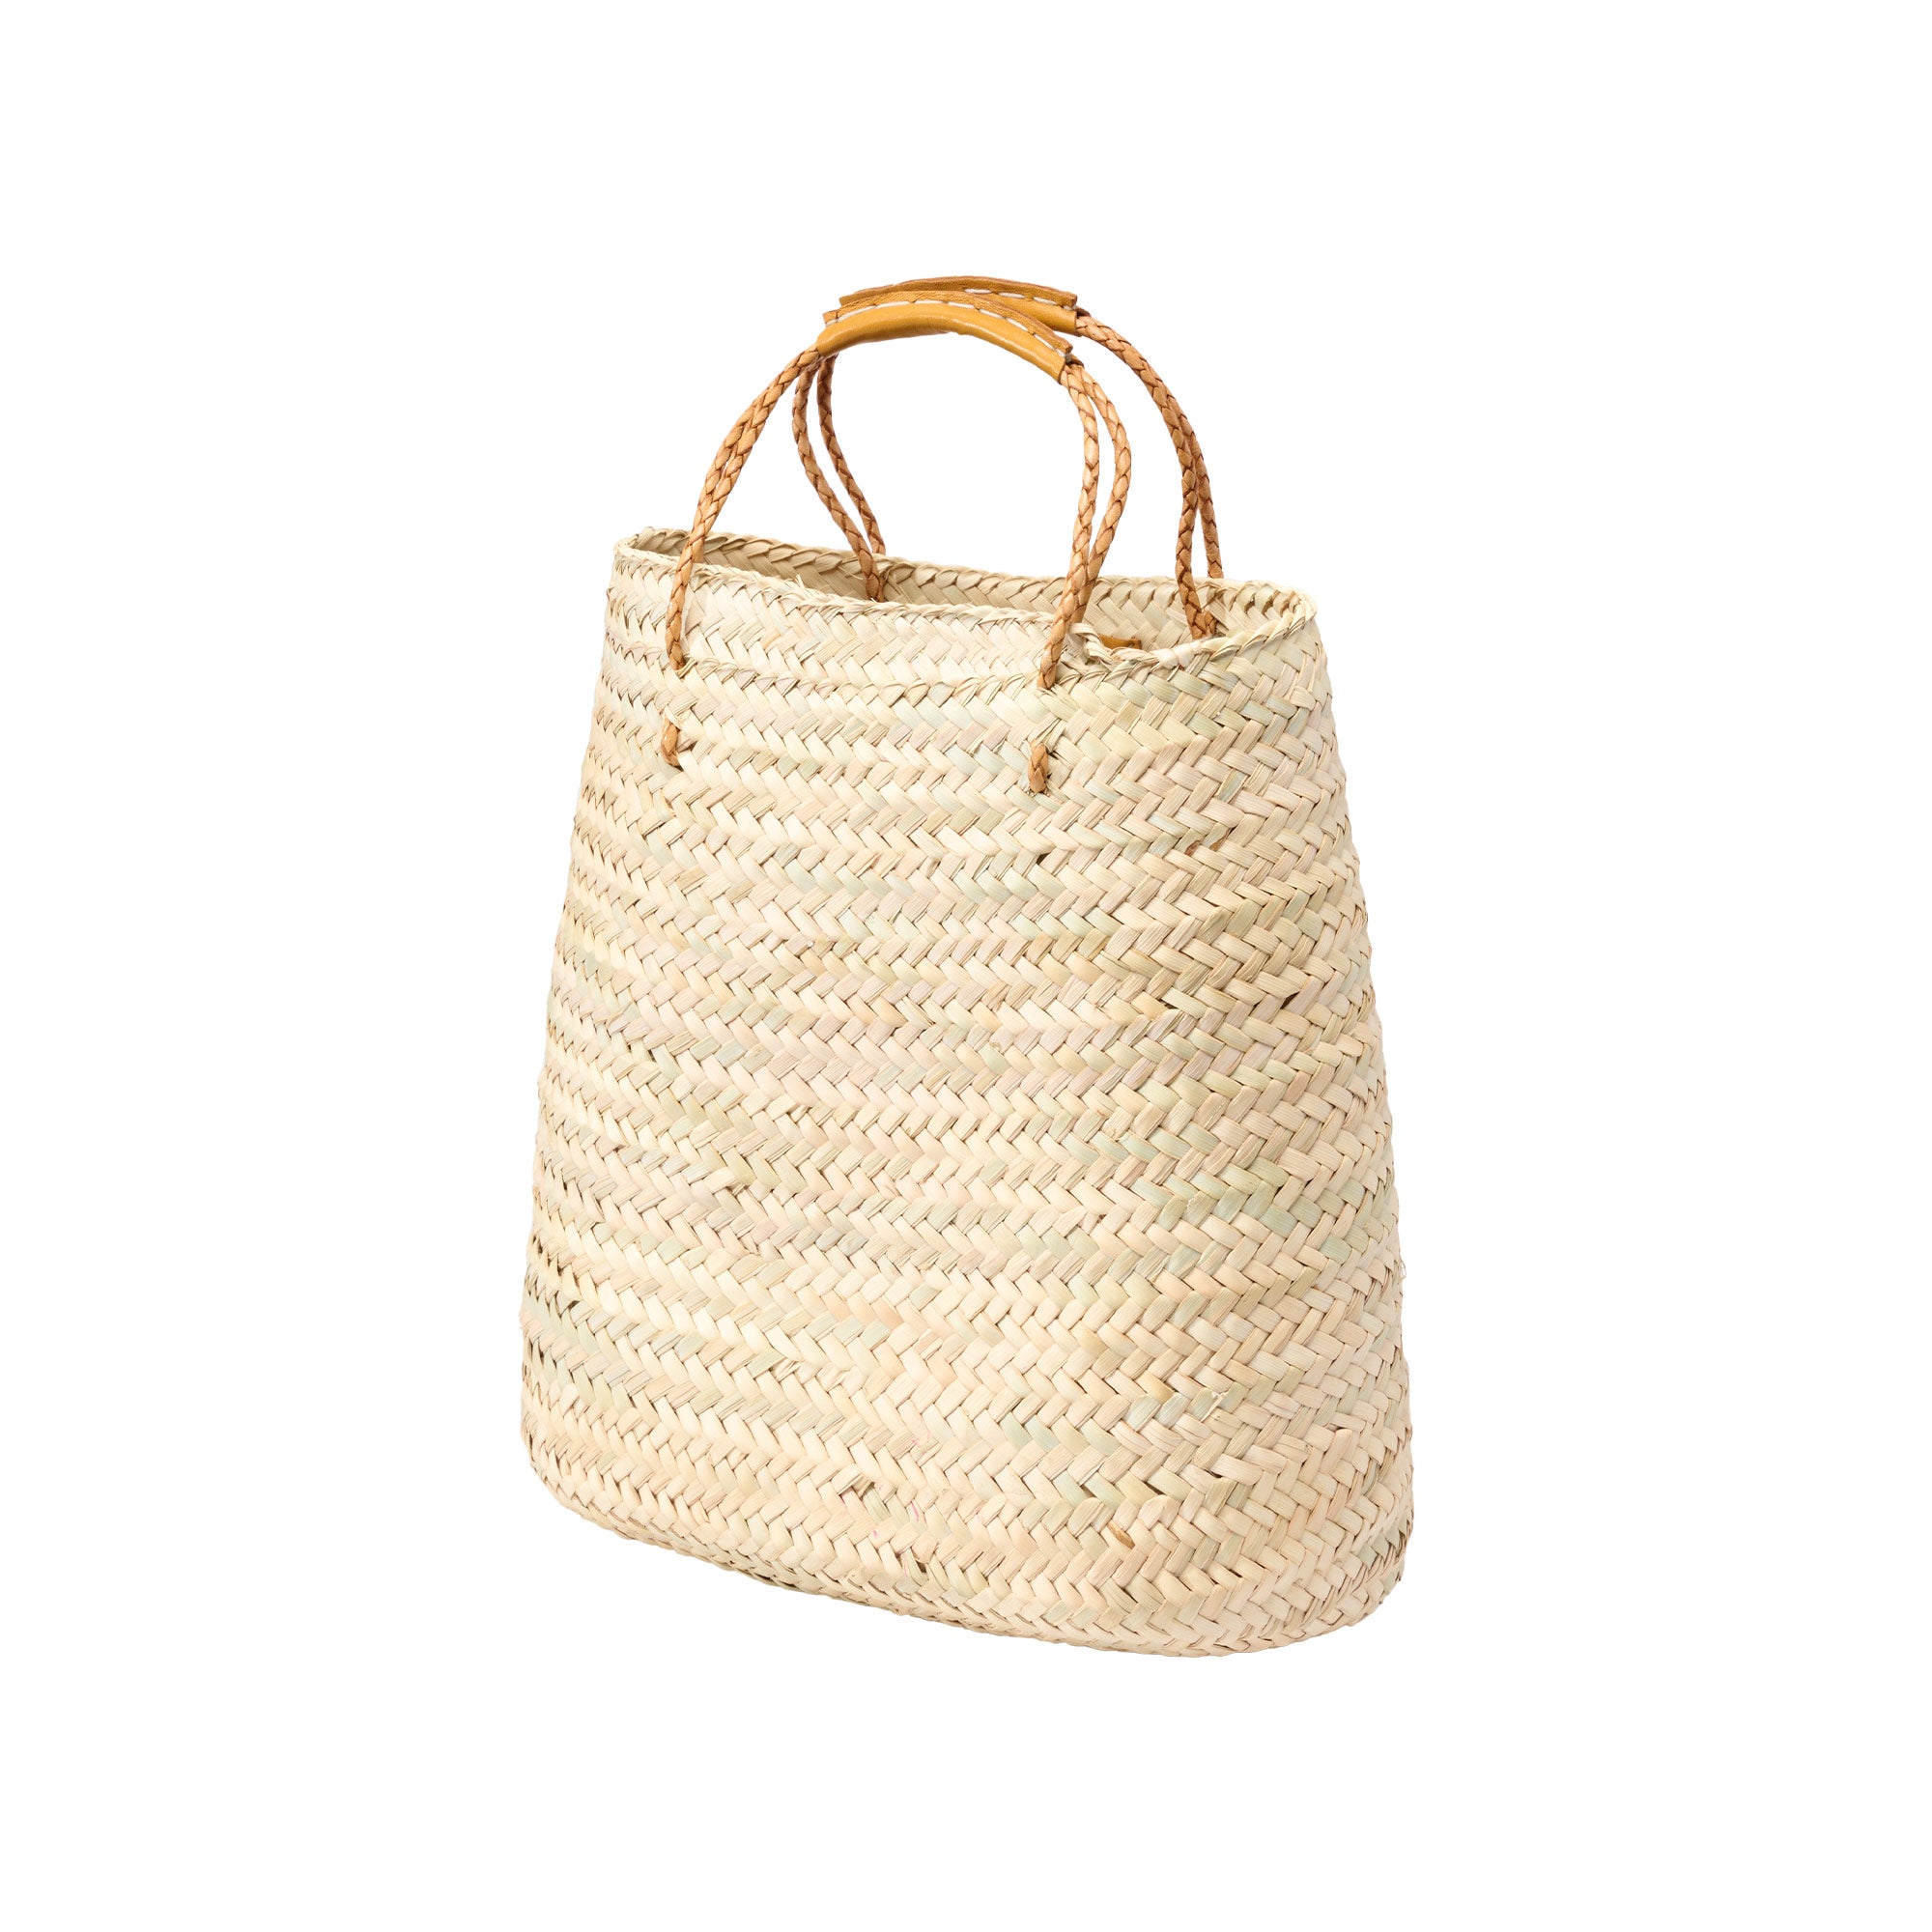 Moroccan-Basket-Purse-with-Leather-Handles-side